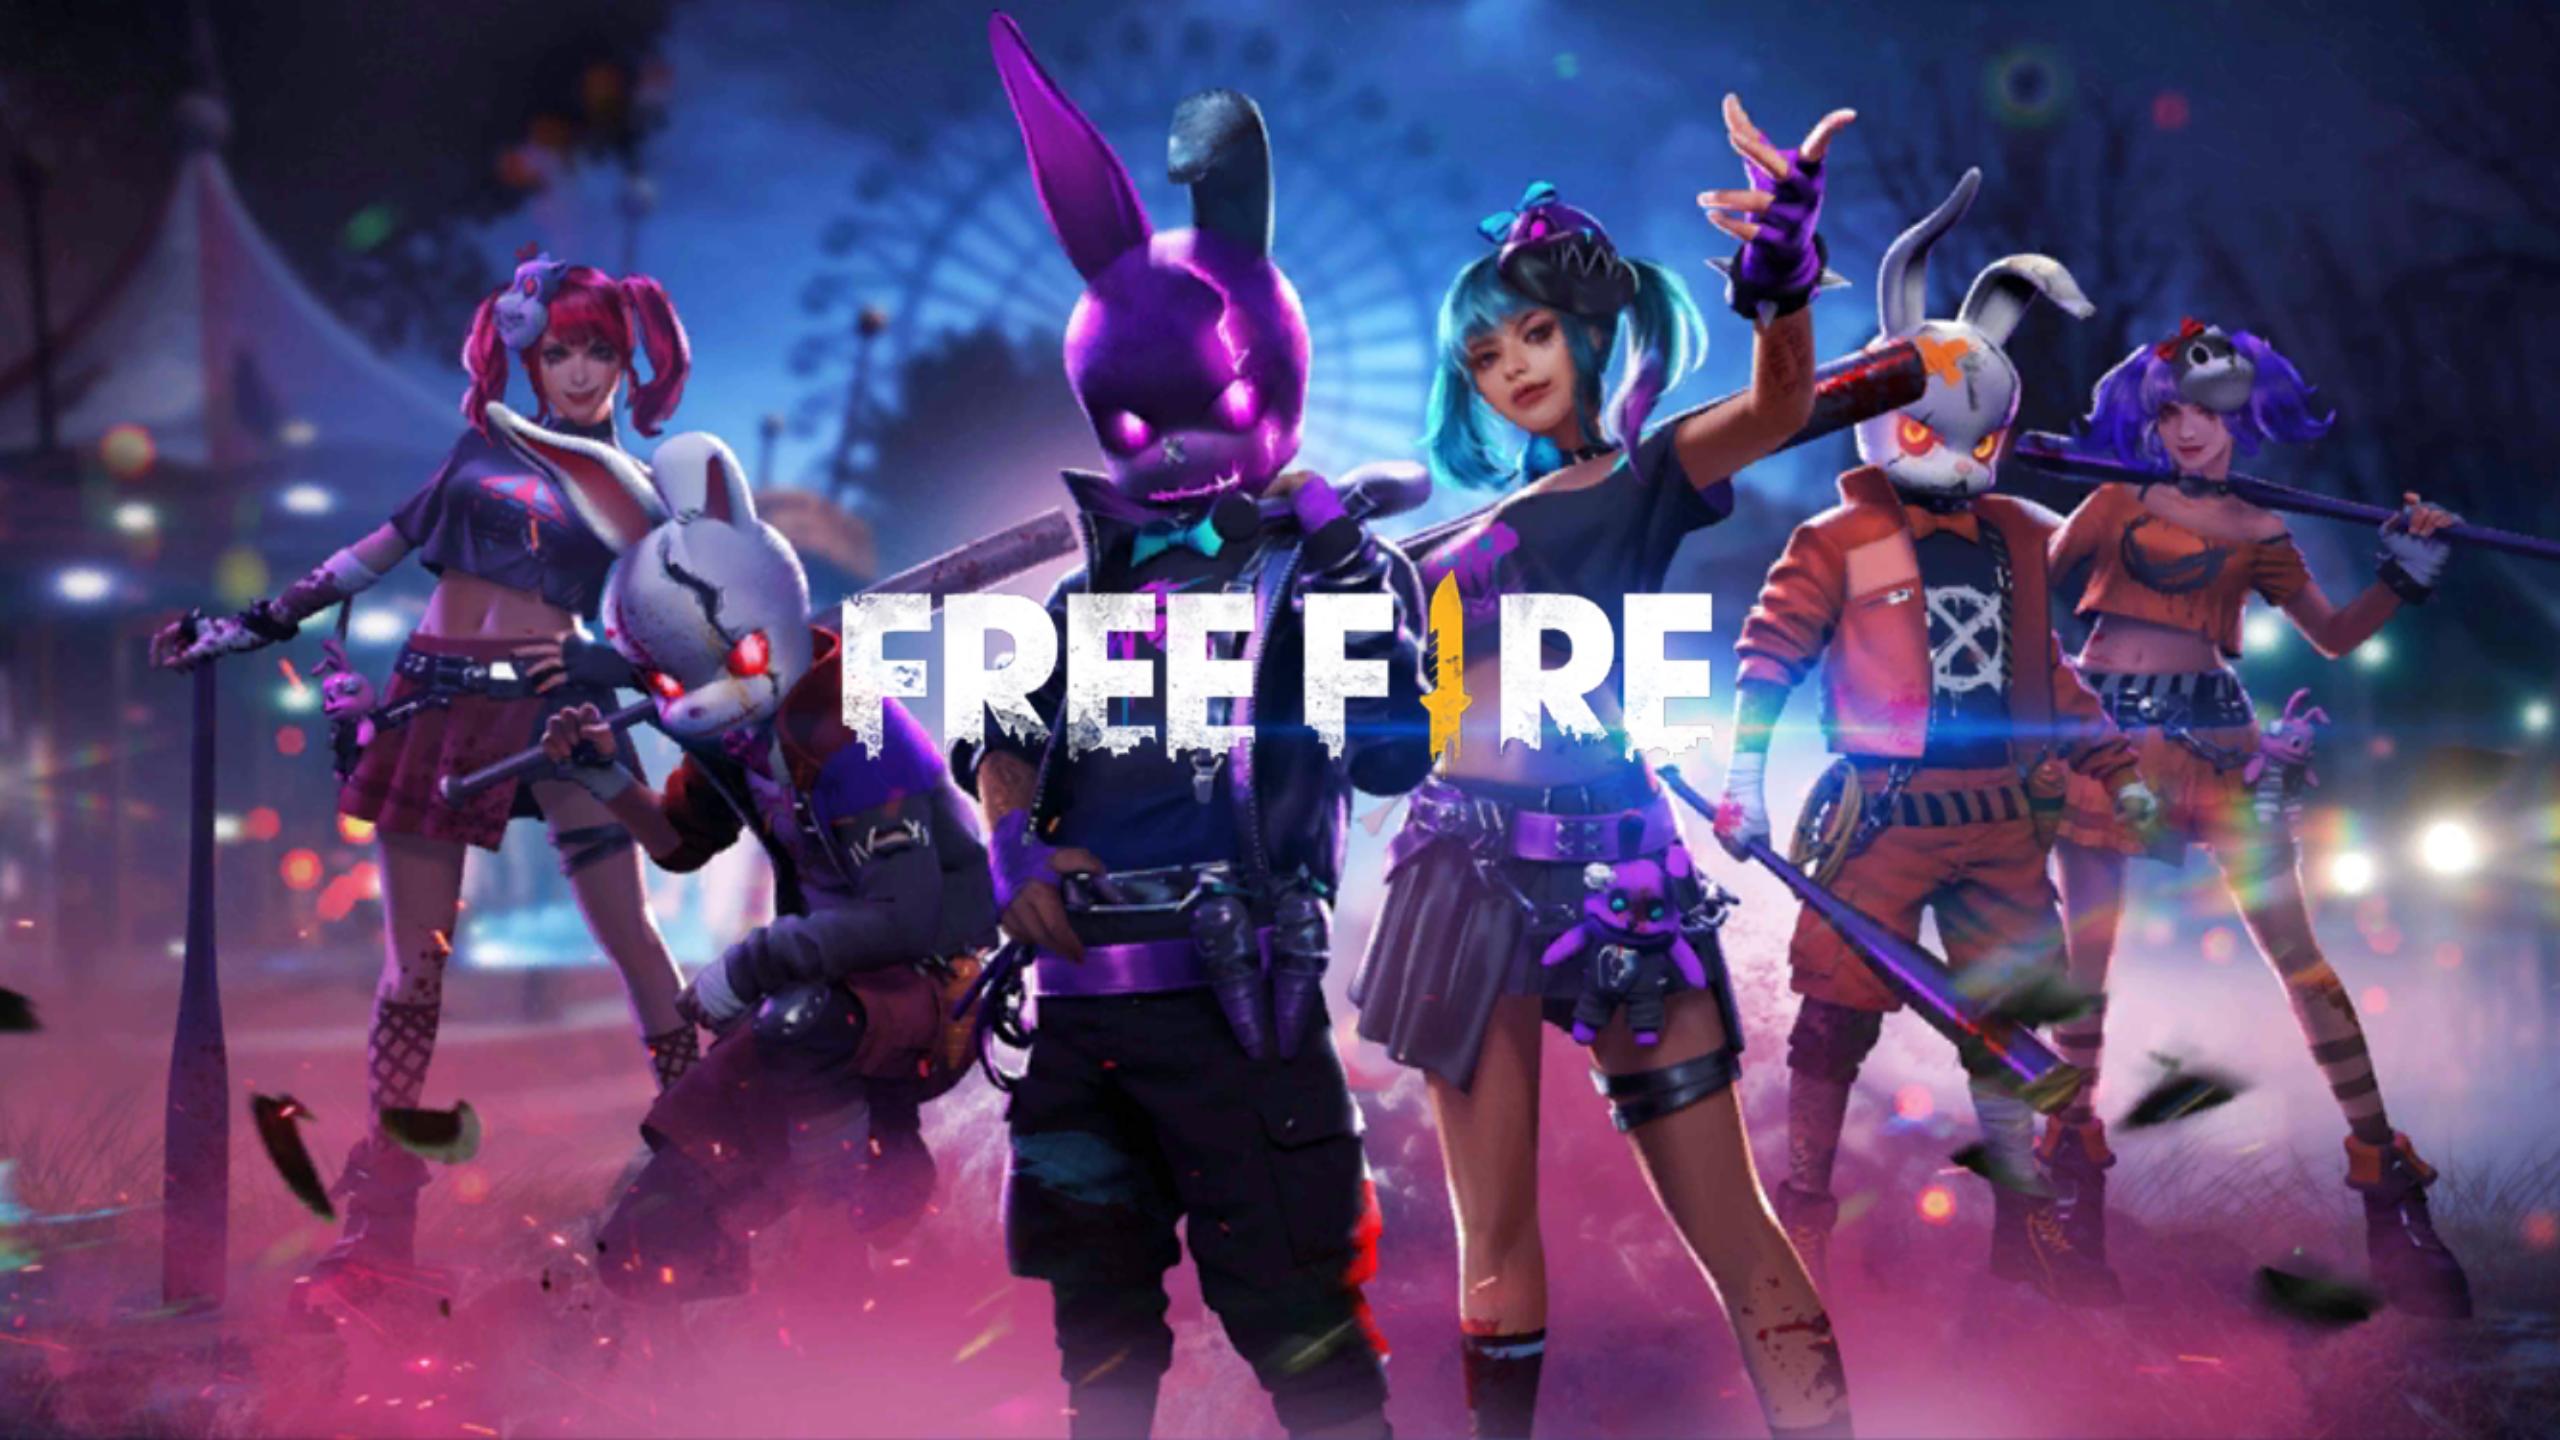 New Garena Free Fire 2020 Wallpapers